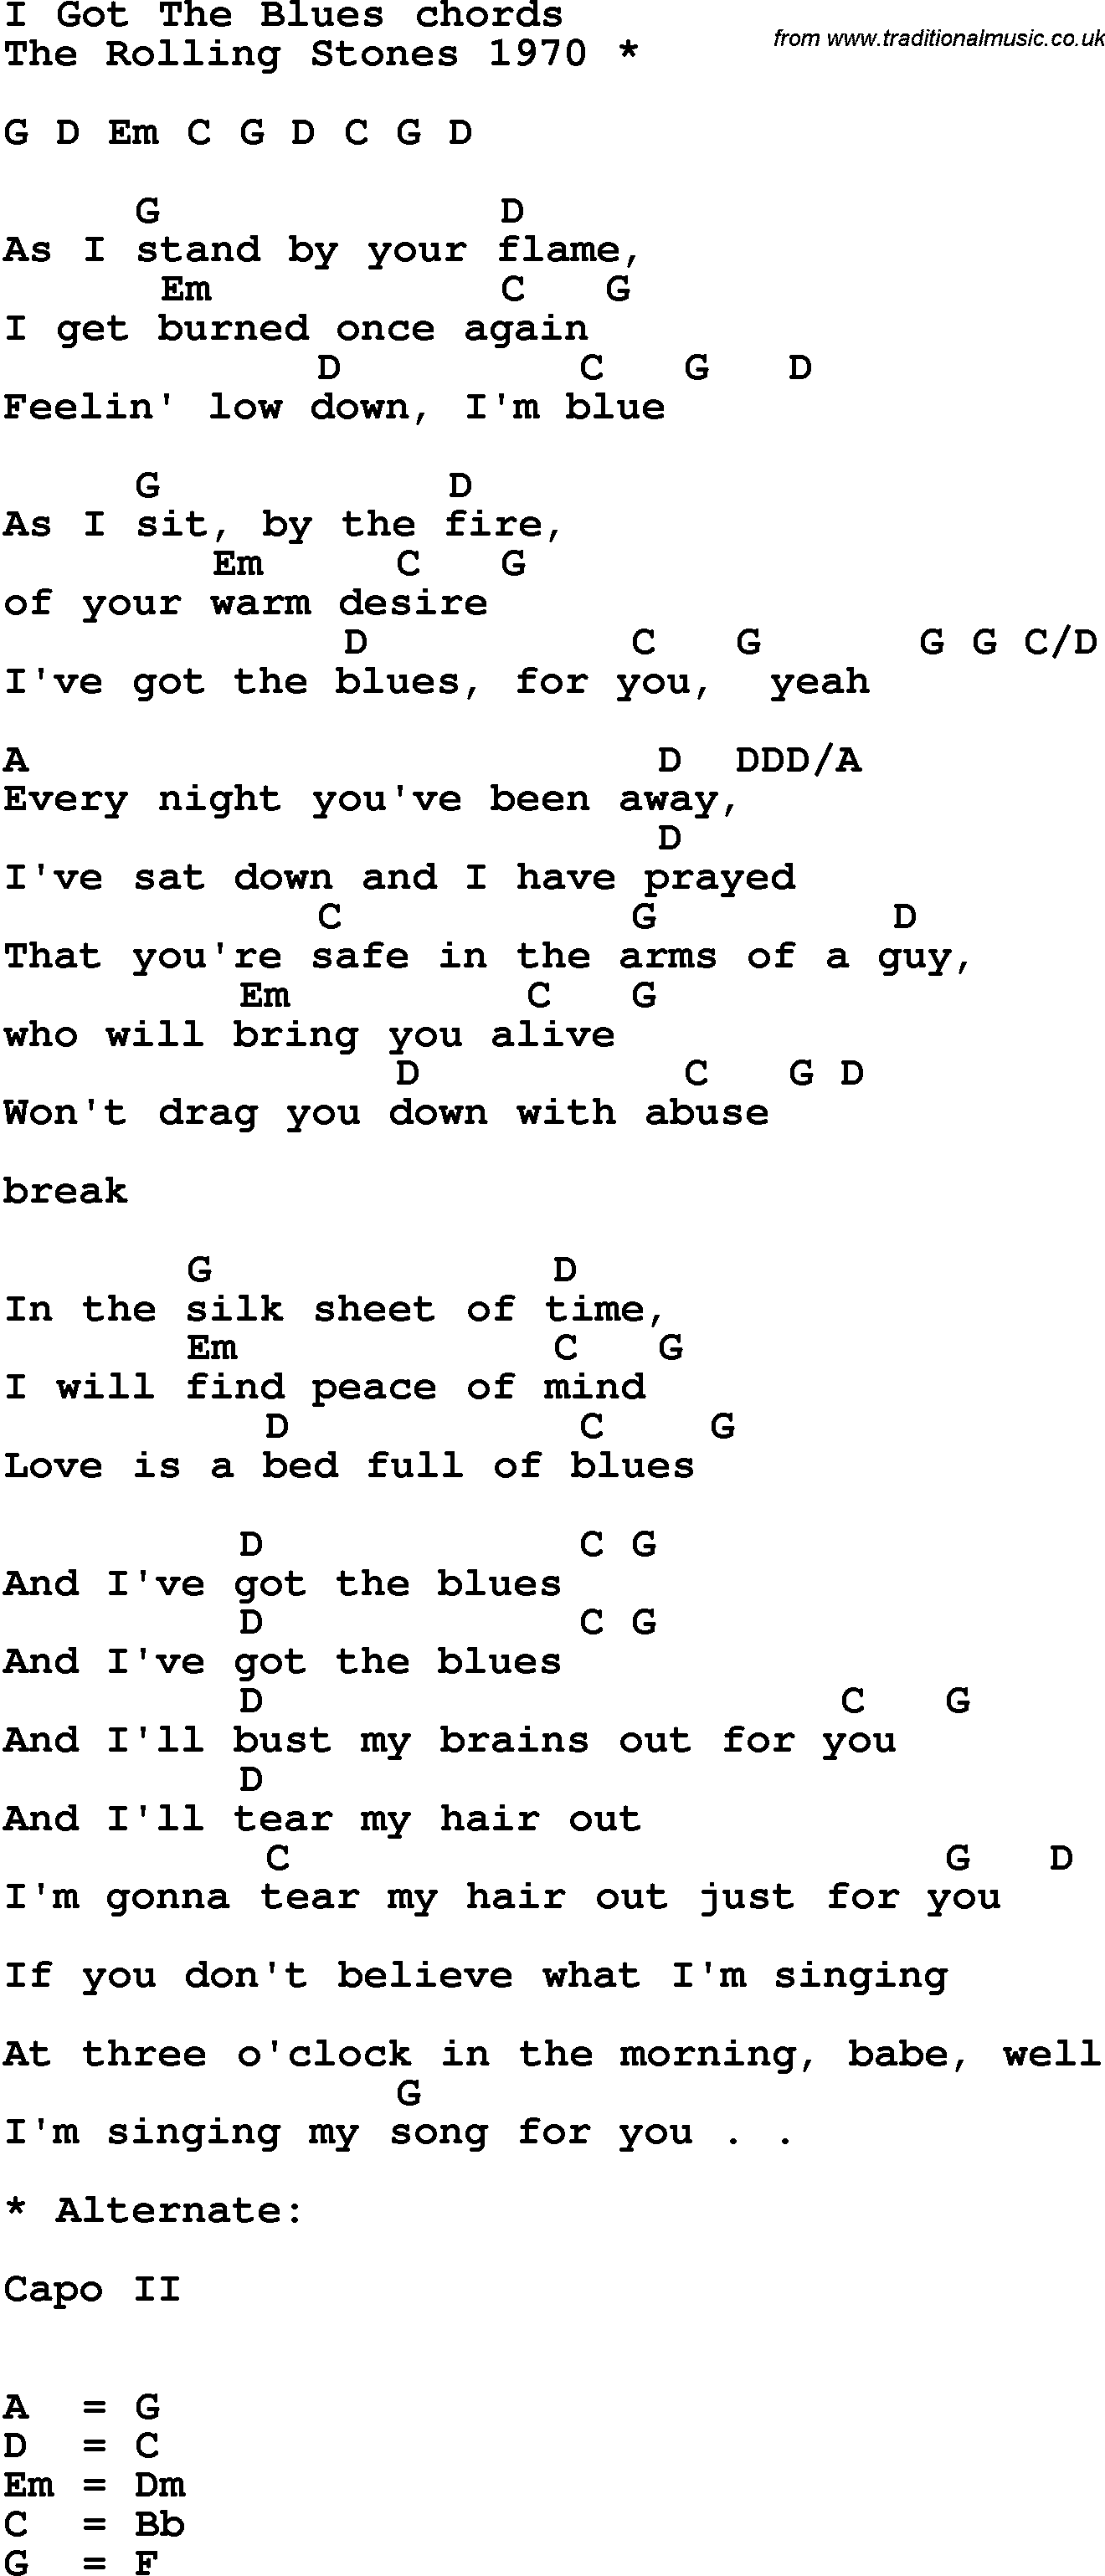 Song Lyrics with guitar chords for I Got The Blues